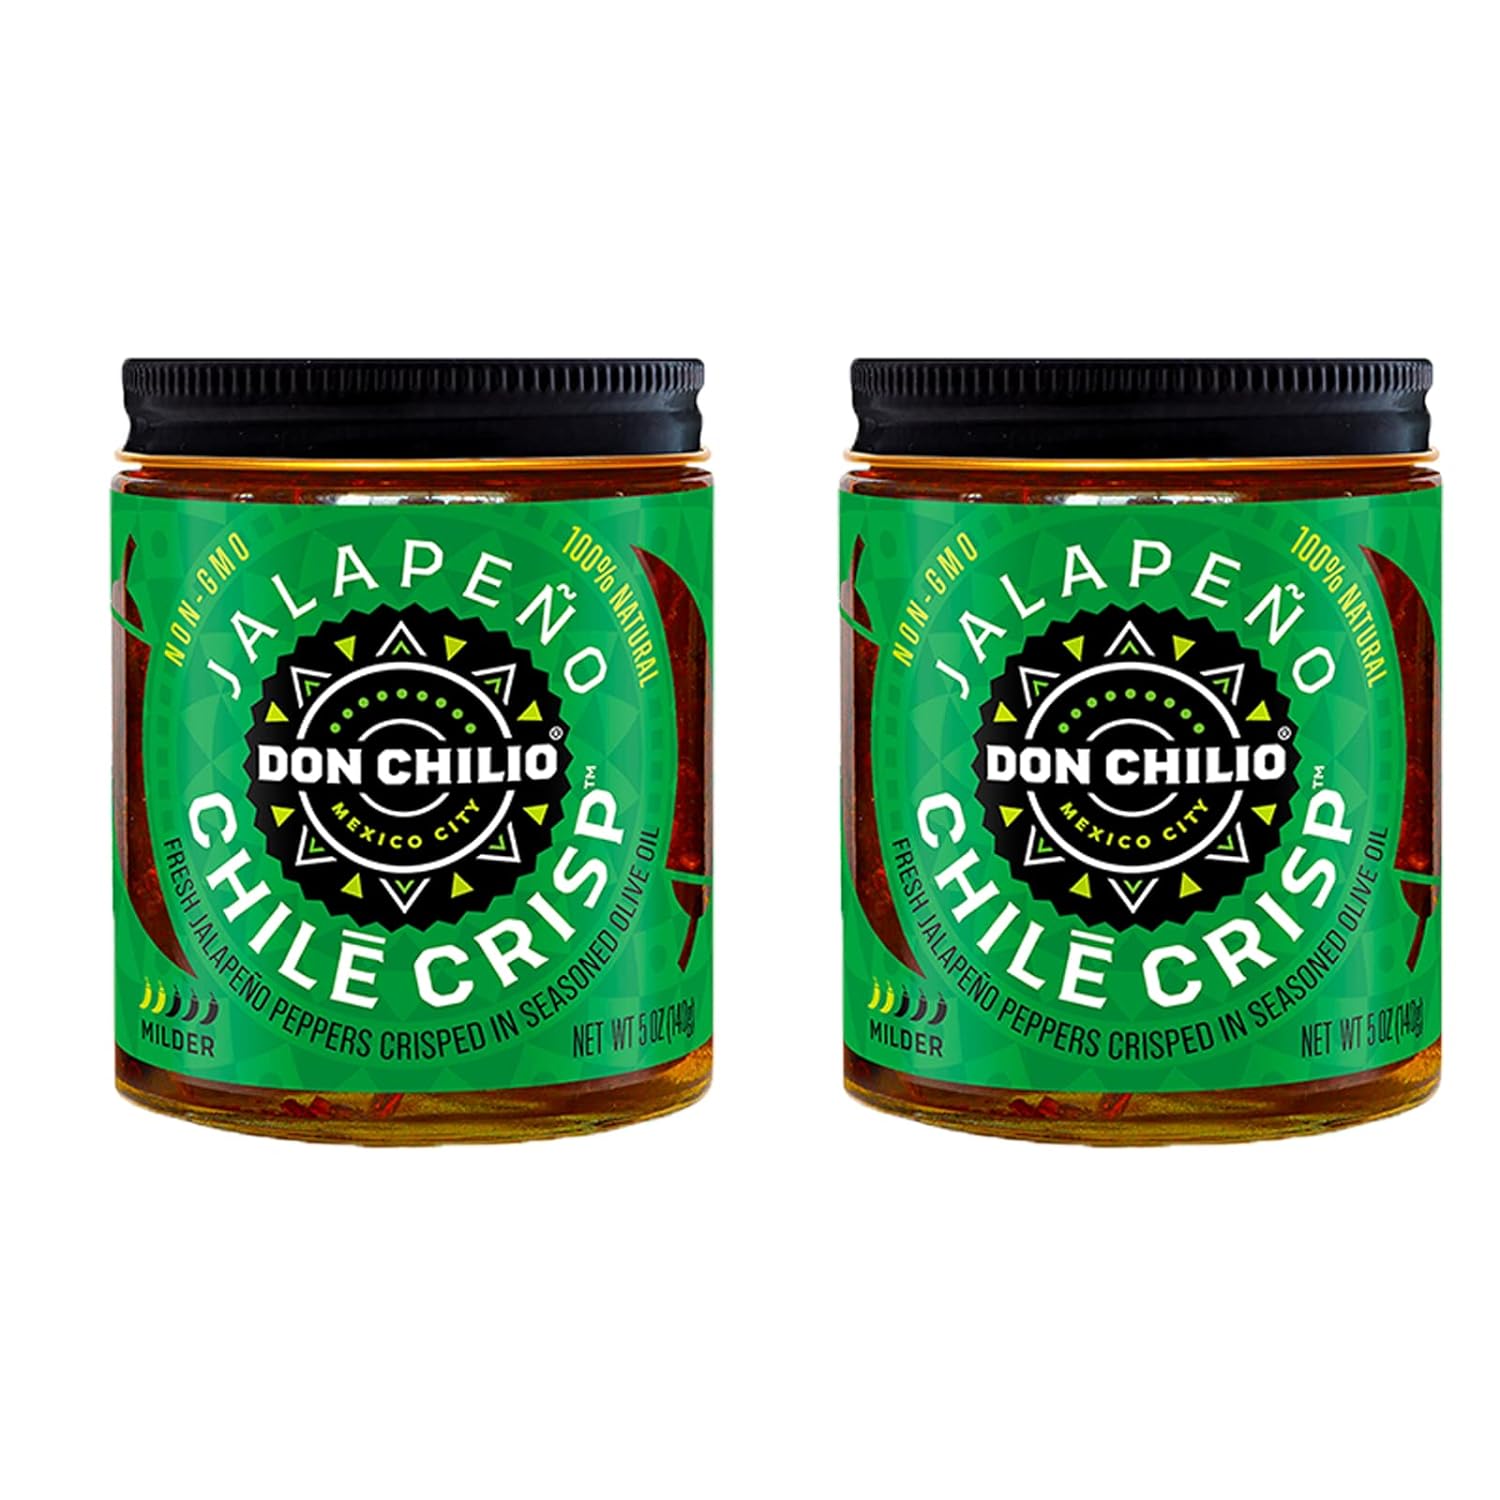 Don Chilio Mild Jalapeno Mexican Chile Crisp, 5 oz., 2 Pack – Crunchy Sliced Jalapenos Fried Chili Peppers in Hot Seasoned 100% Olive Oil – Keto-Friendly, Vegan, Gluten Free